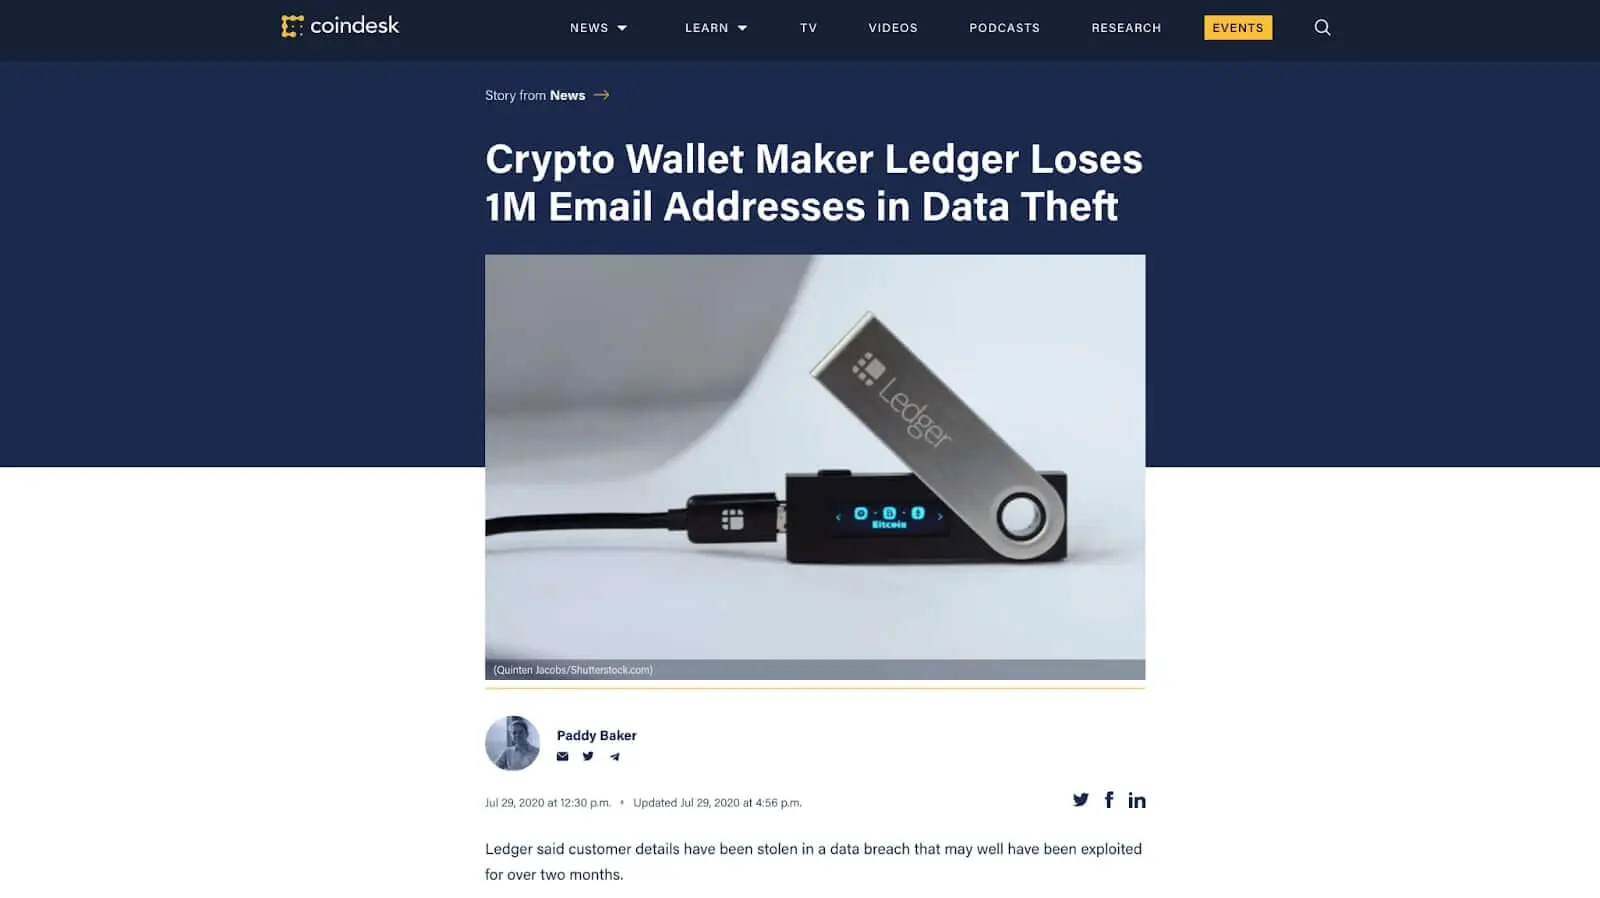 Crypto Wallet maker Ledger loses 1M email addresses in Data Theft